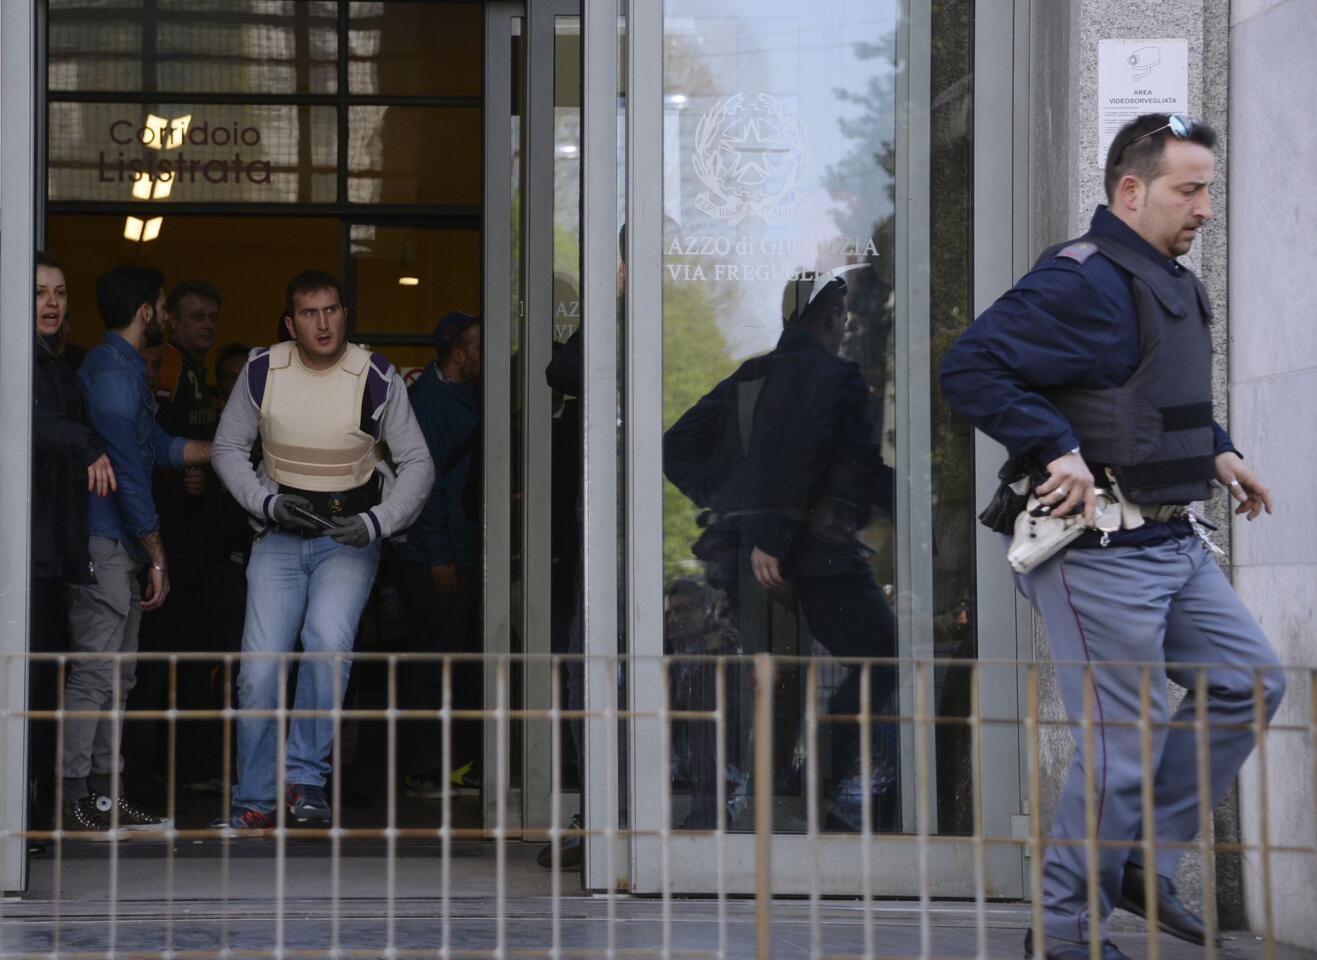 Police officers run through the entrance to Milan's courthouse during a shooting on April 9, 2015. An armed man, identified as Claudio Giardiello, believed to be a defendant in a bankruptcy case was apprehended as the gunman.